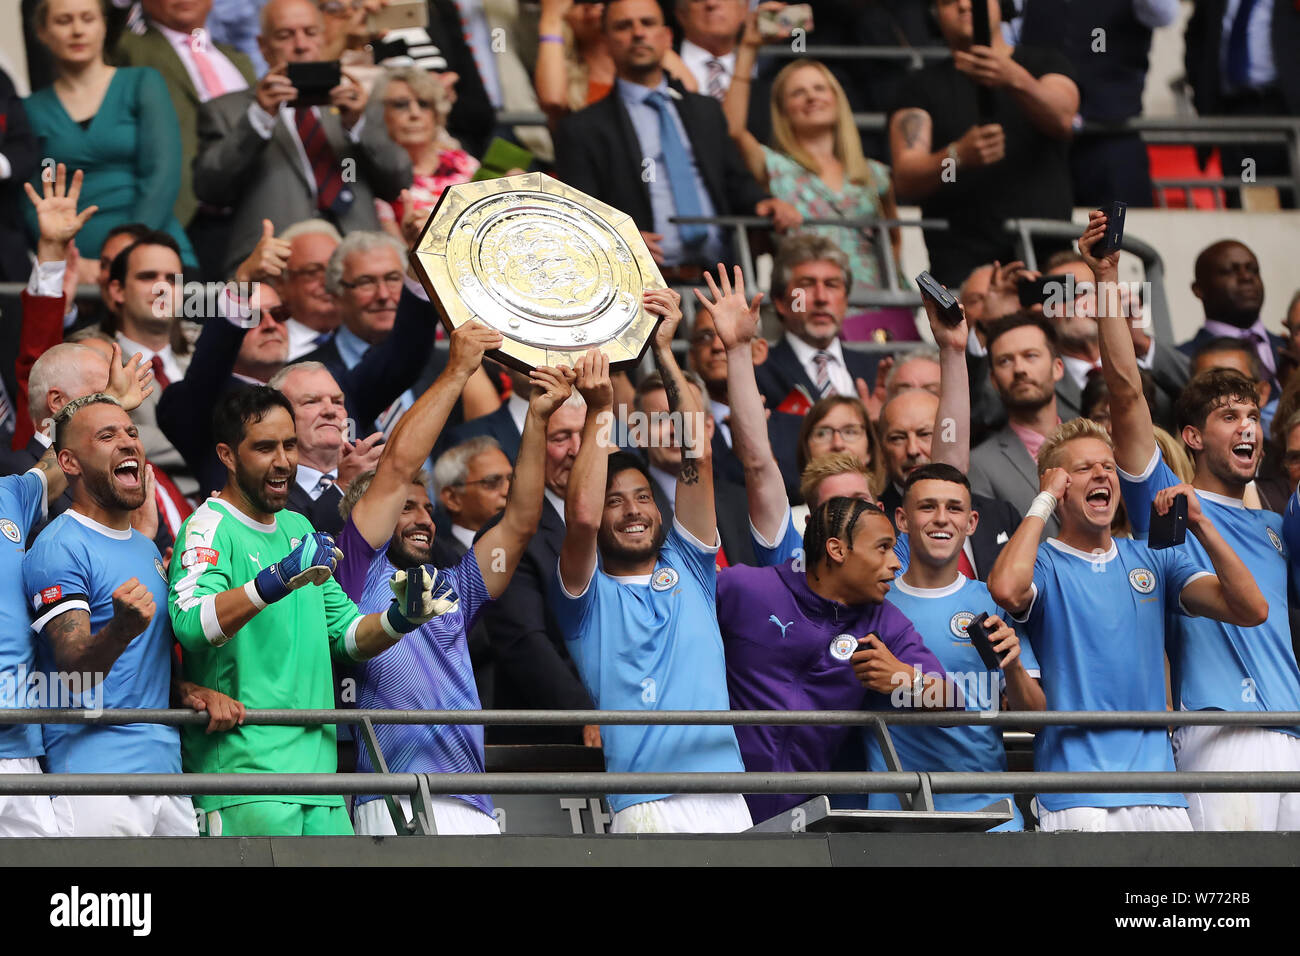 London, UK. 4th Aug 2019. London, UK. 4th Aug 2019. Sergio Aguero and David Silva of Manchester City lift the FA Community Shield in celebration - Liverpool v Manchester City, FA Community Shield, Wembley Stadium, London, UK - 4th August 2019 Editorial Use Only Credit: MatchDay Images Limited/Alamy Live News Stock Photo